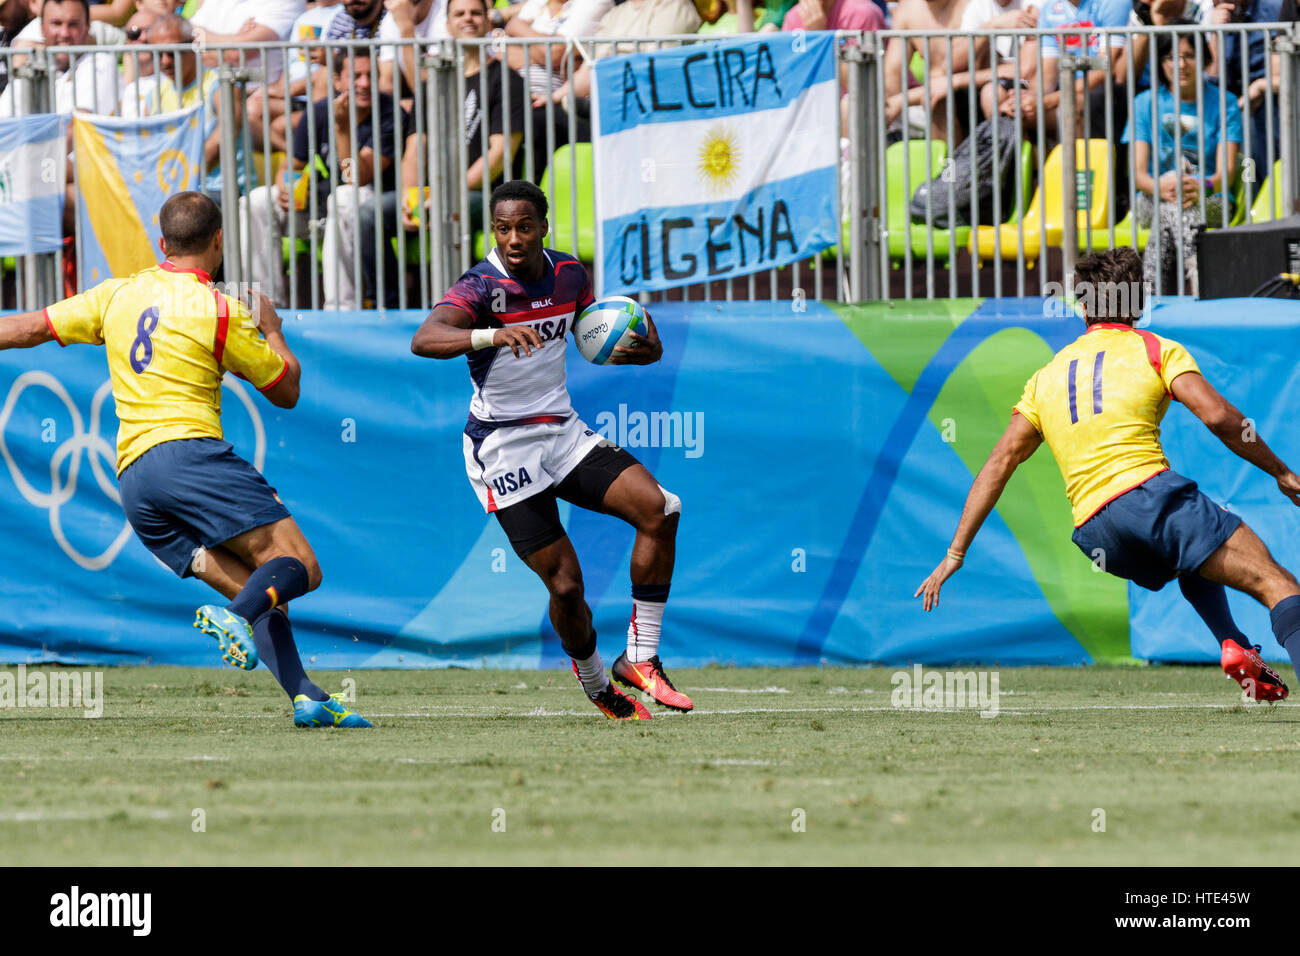 Rio de Janeiro, Brazil. 11 August 2016 Carlin Isles (USA) competes in the Men's  Rugby Sevens in a match vs. Spain at the 2016 Olympic Summer Games. © Stock Photo